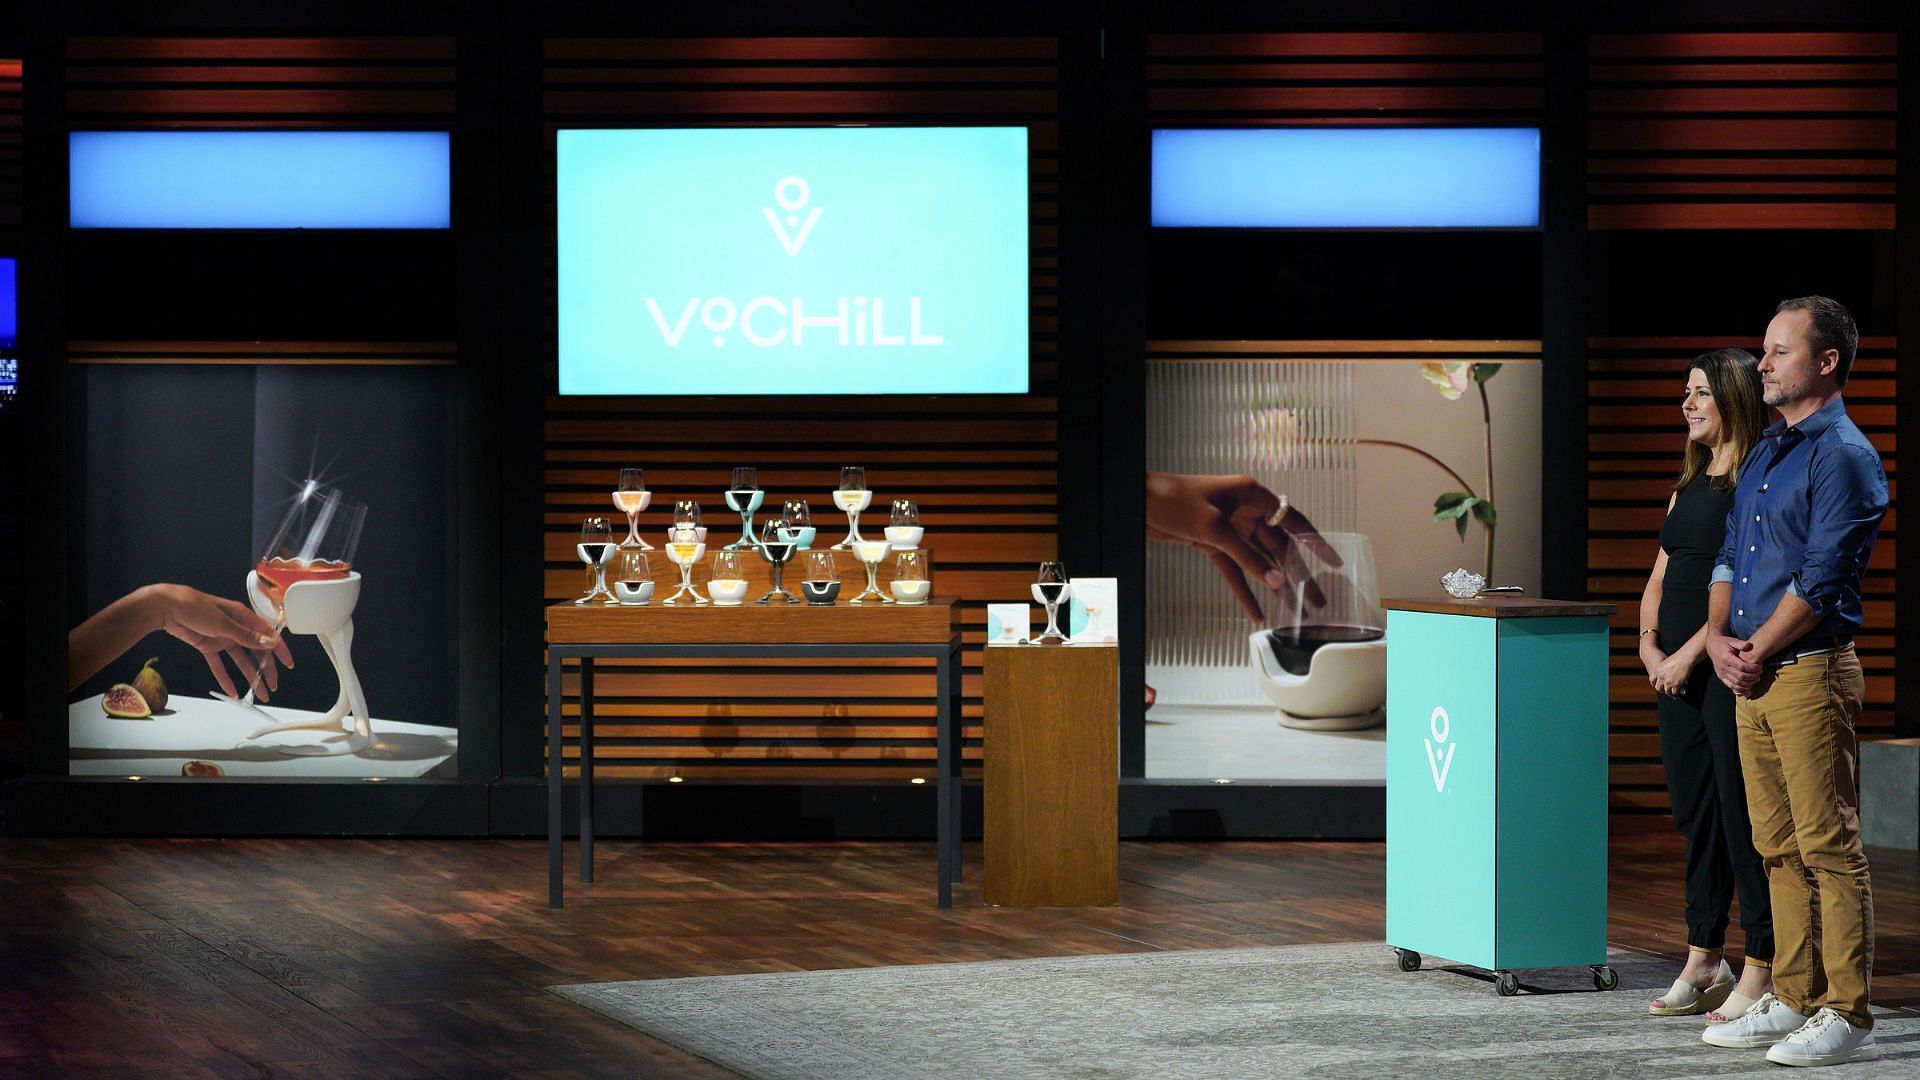 VoChill founders pitch their product on Shark Tank